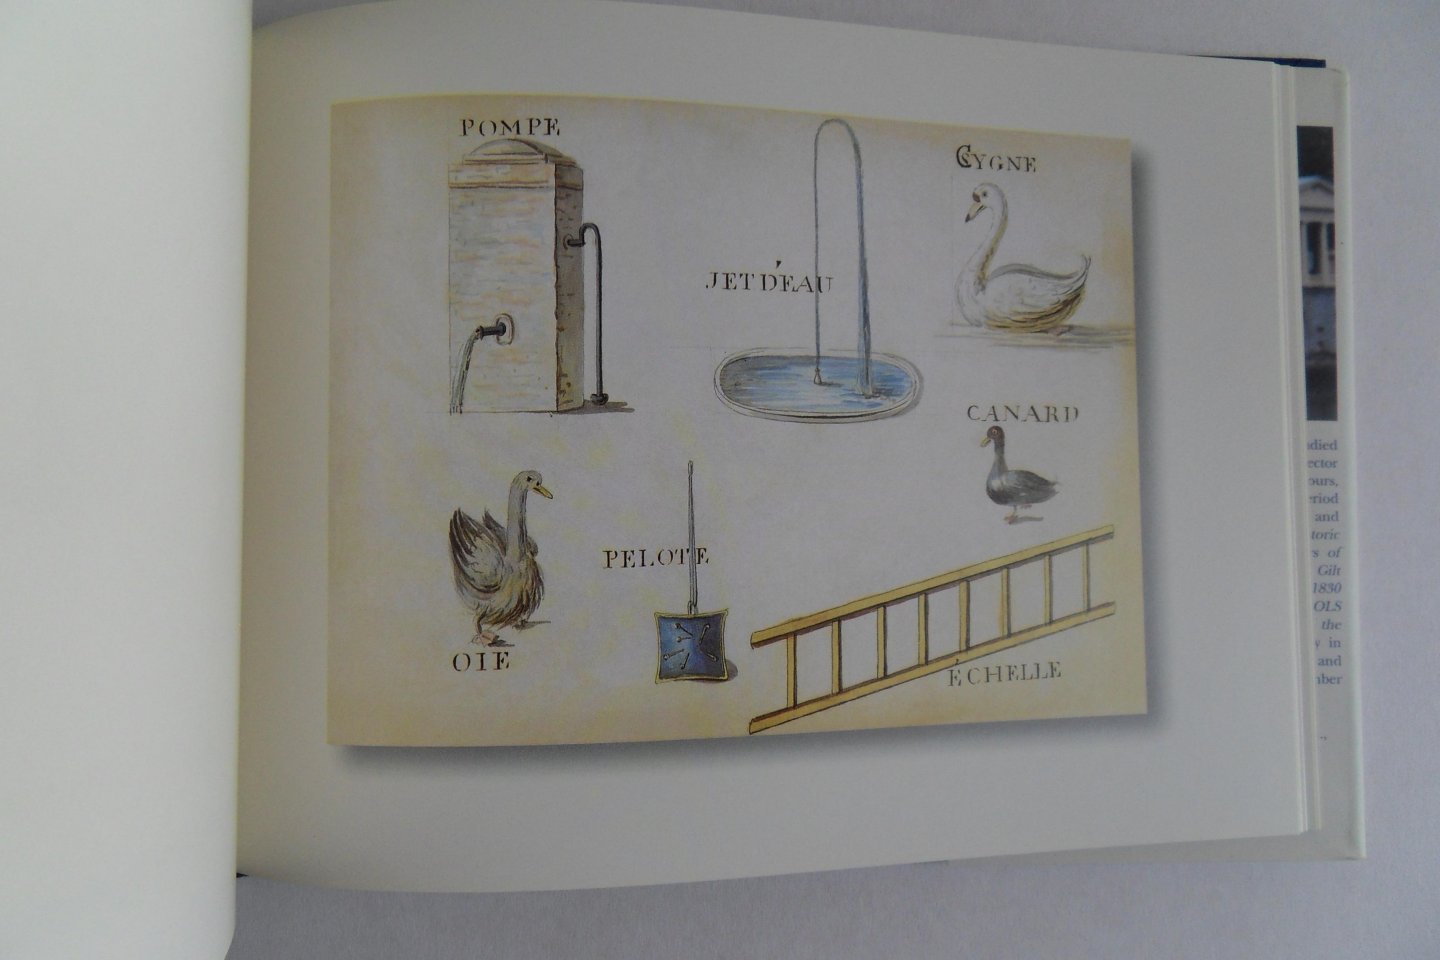 Plante, Charles. - A French Alphabet Book of 1814. - For Alfred Bourdier De Beauregard. - Created by His Uncle Arnaud at the Chateau De Beaumont De Beauregard.